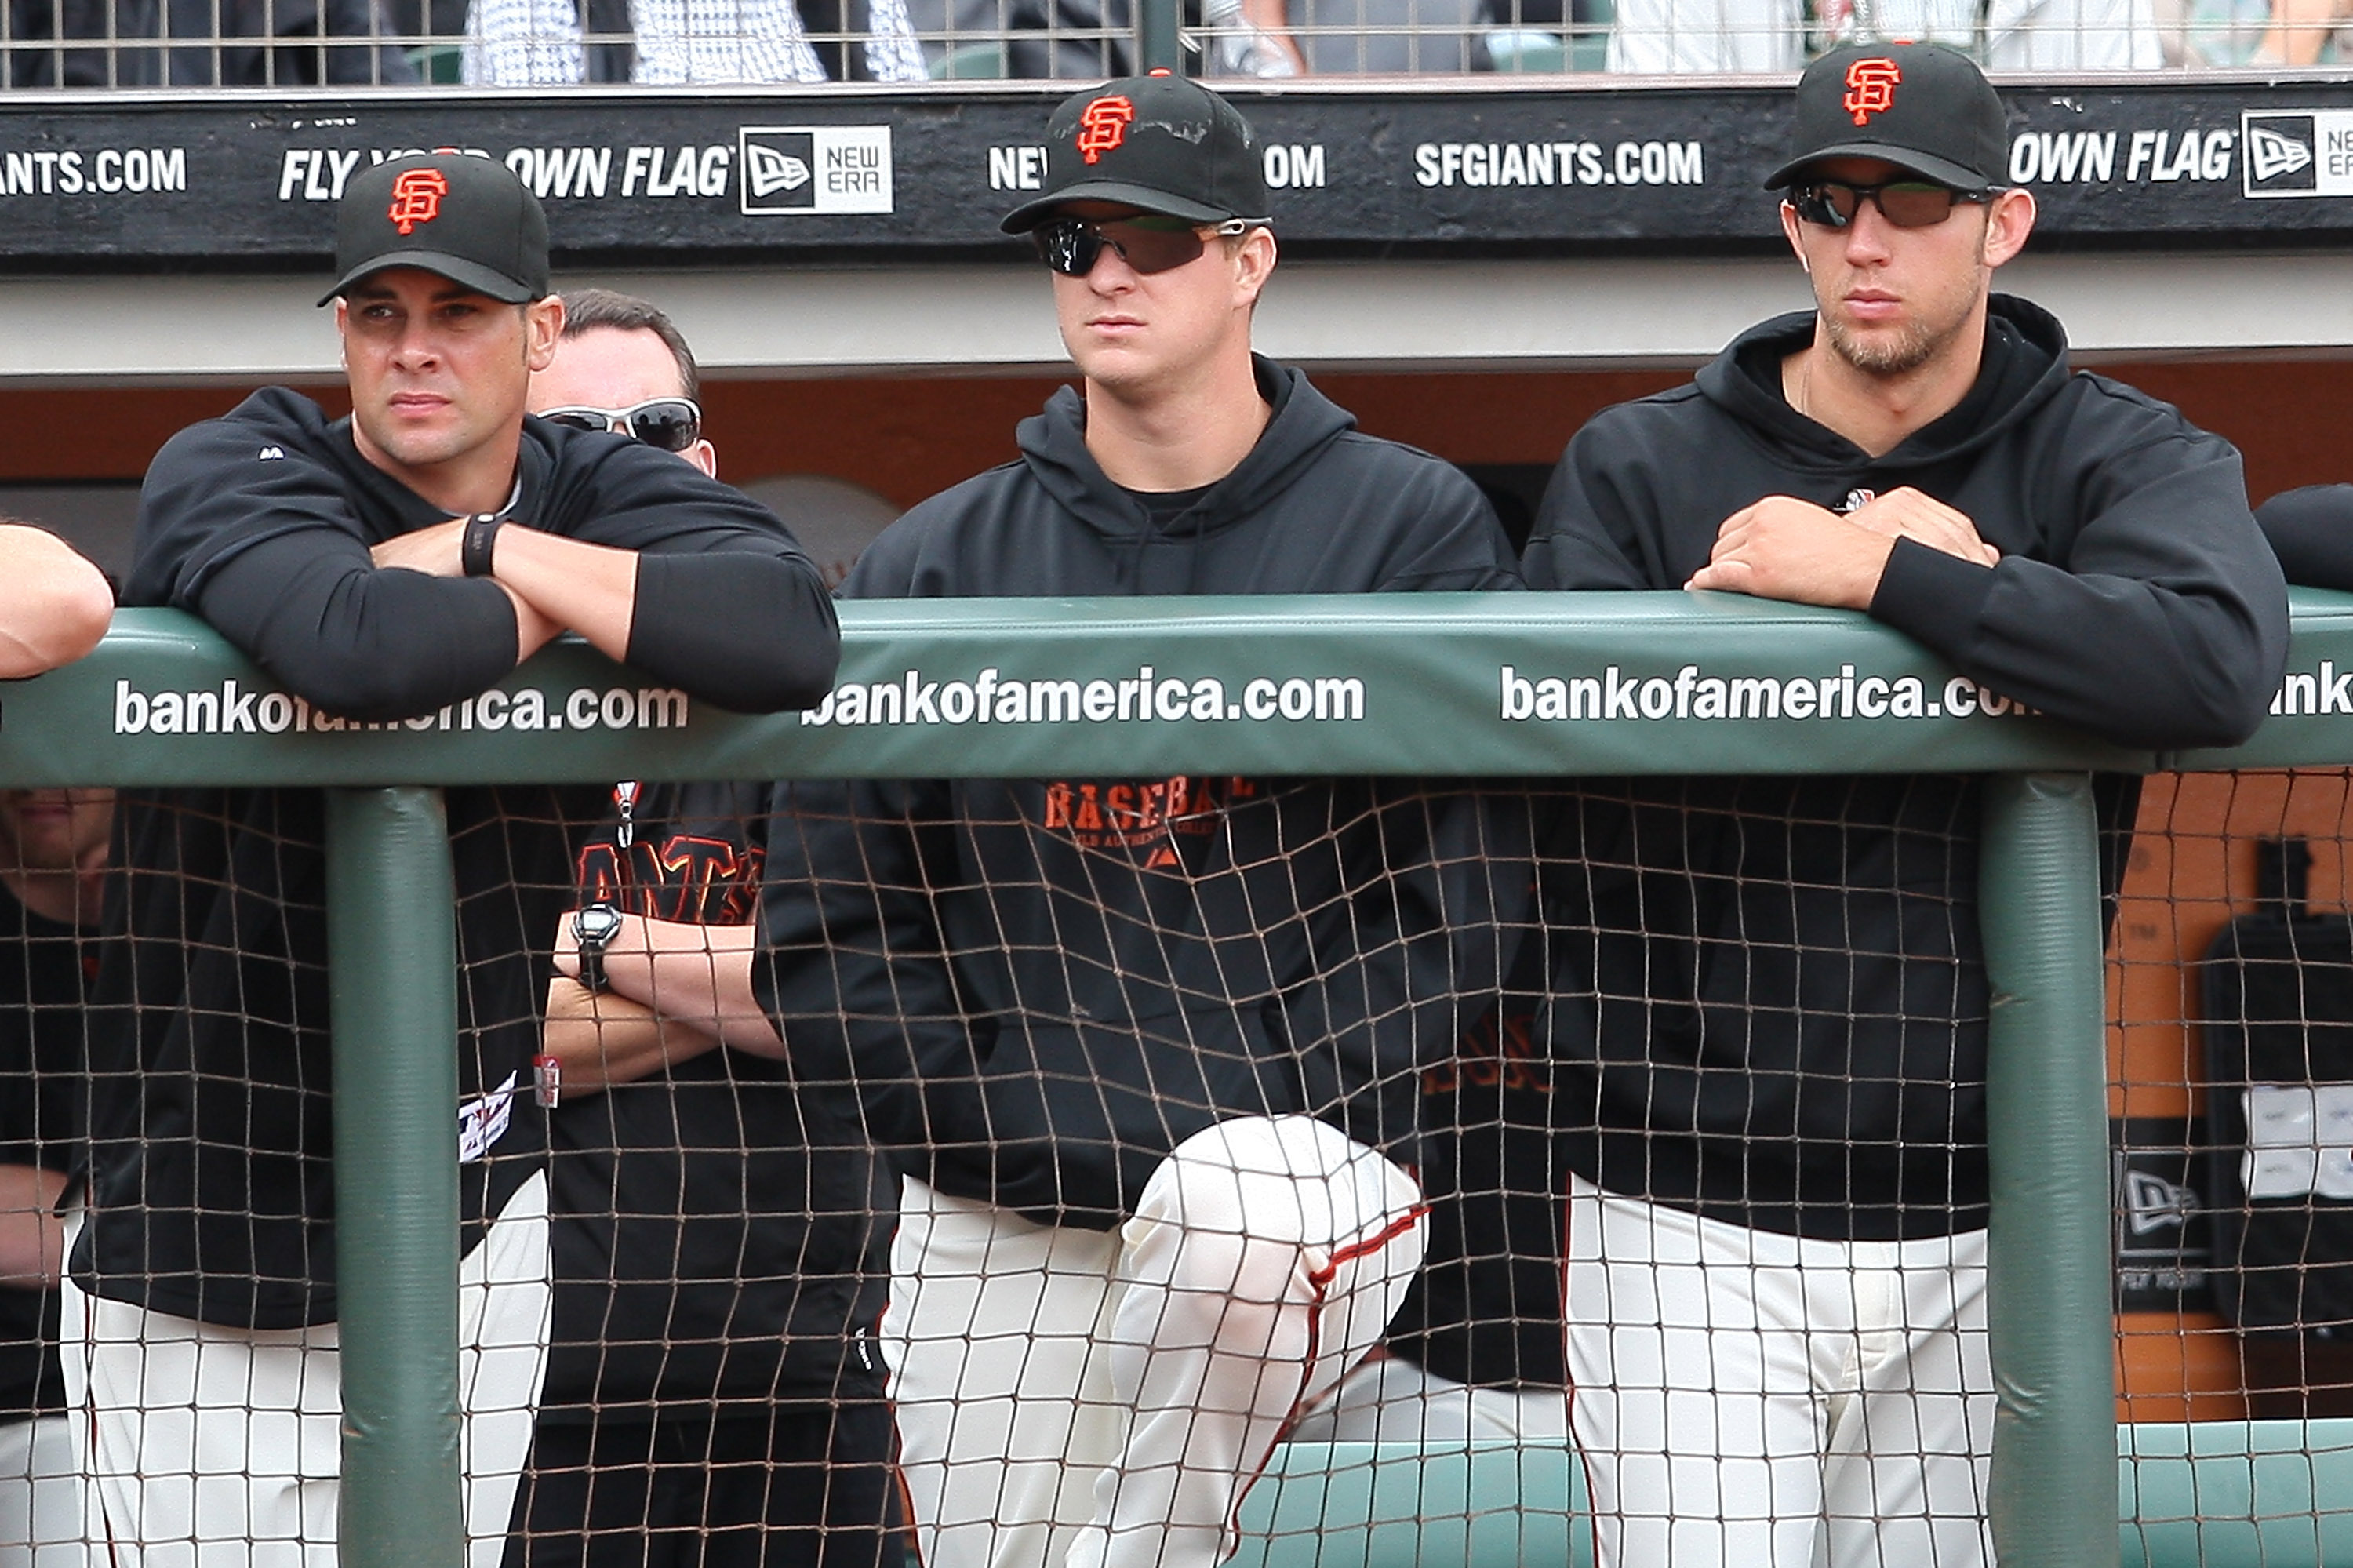 The Giants are either angry, happy, or Bruce Bochy in their spring